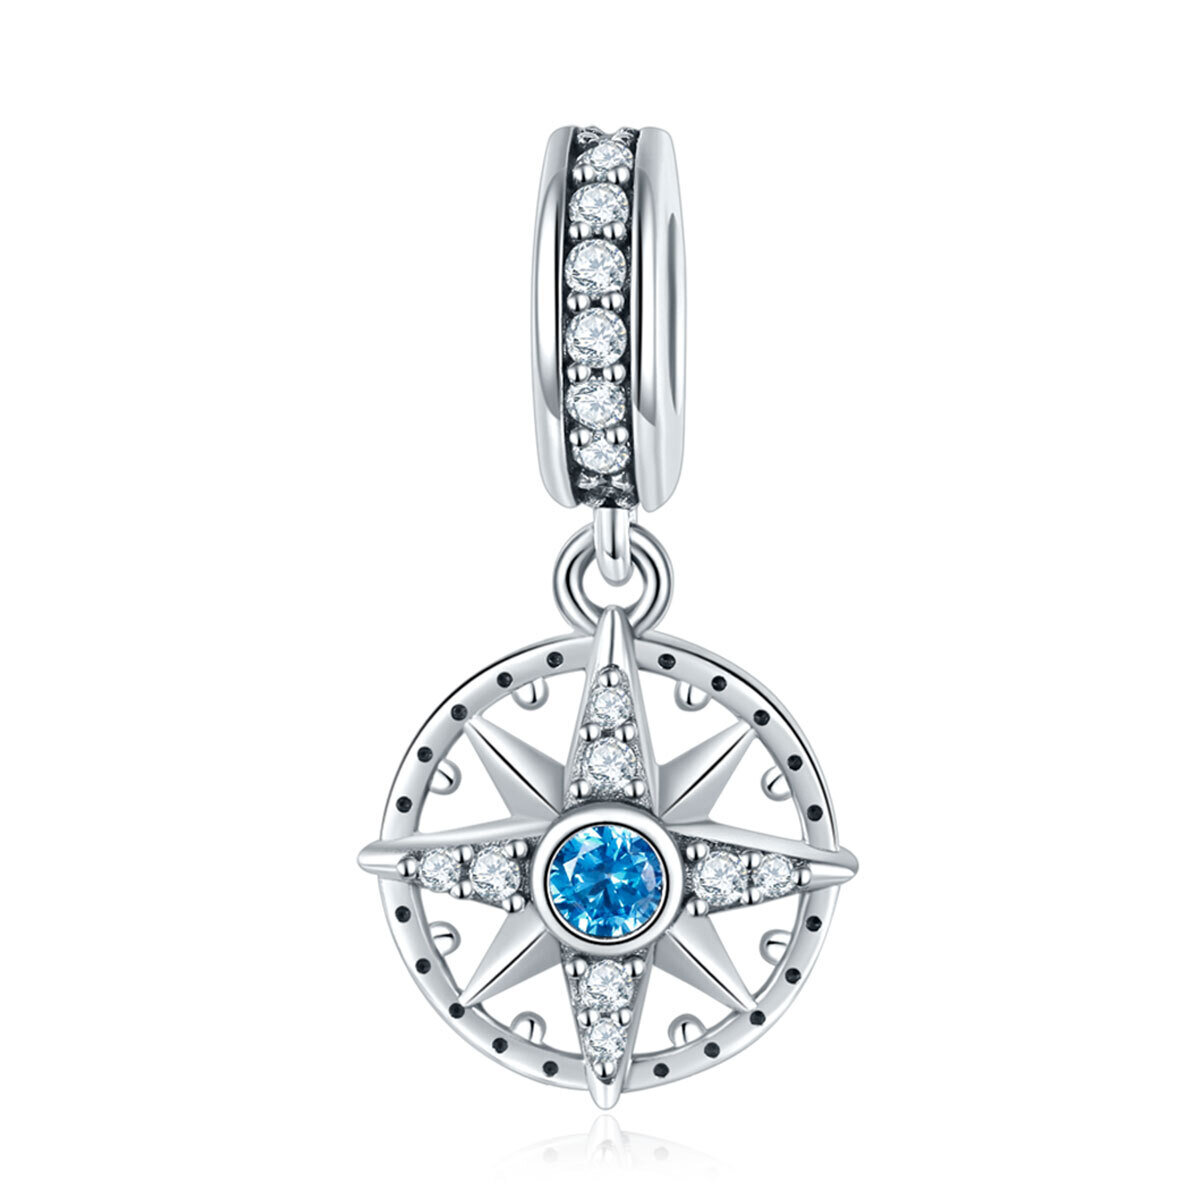 GemKing SCC847 the Compass S925 Sterling Silver Charm